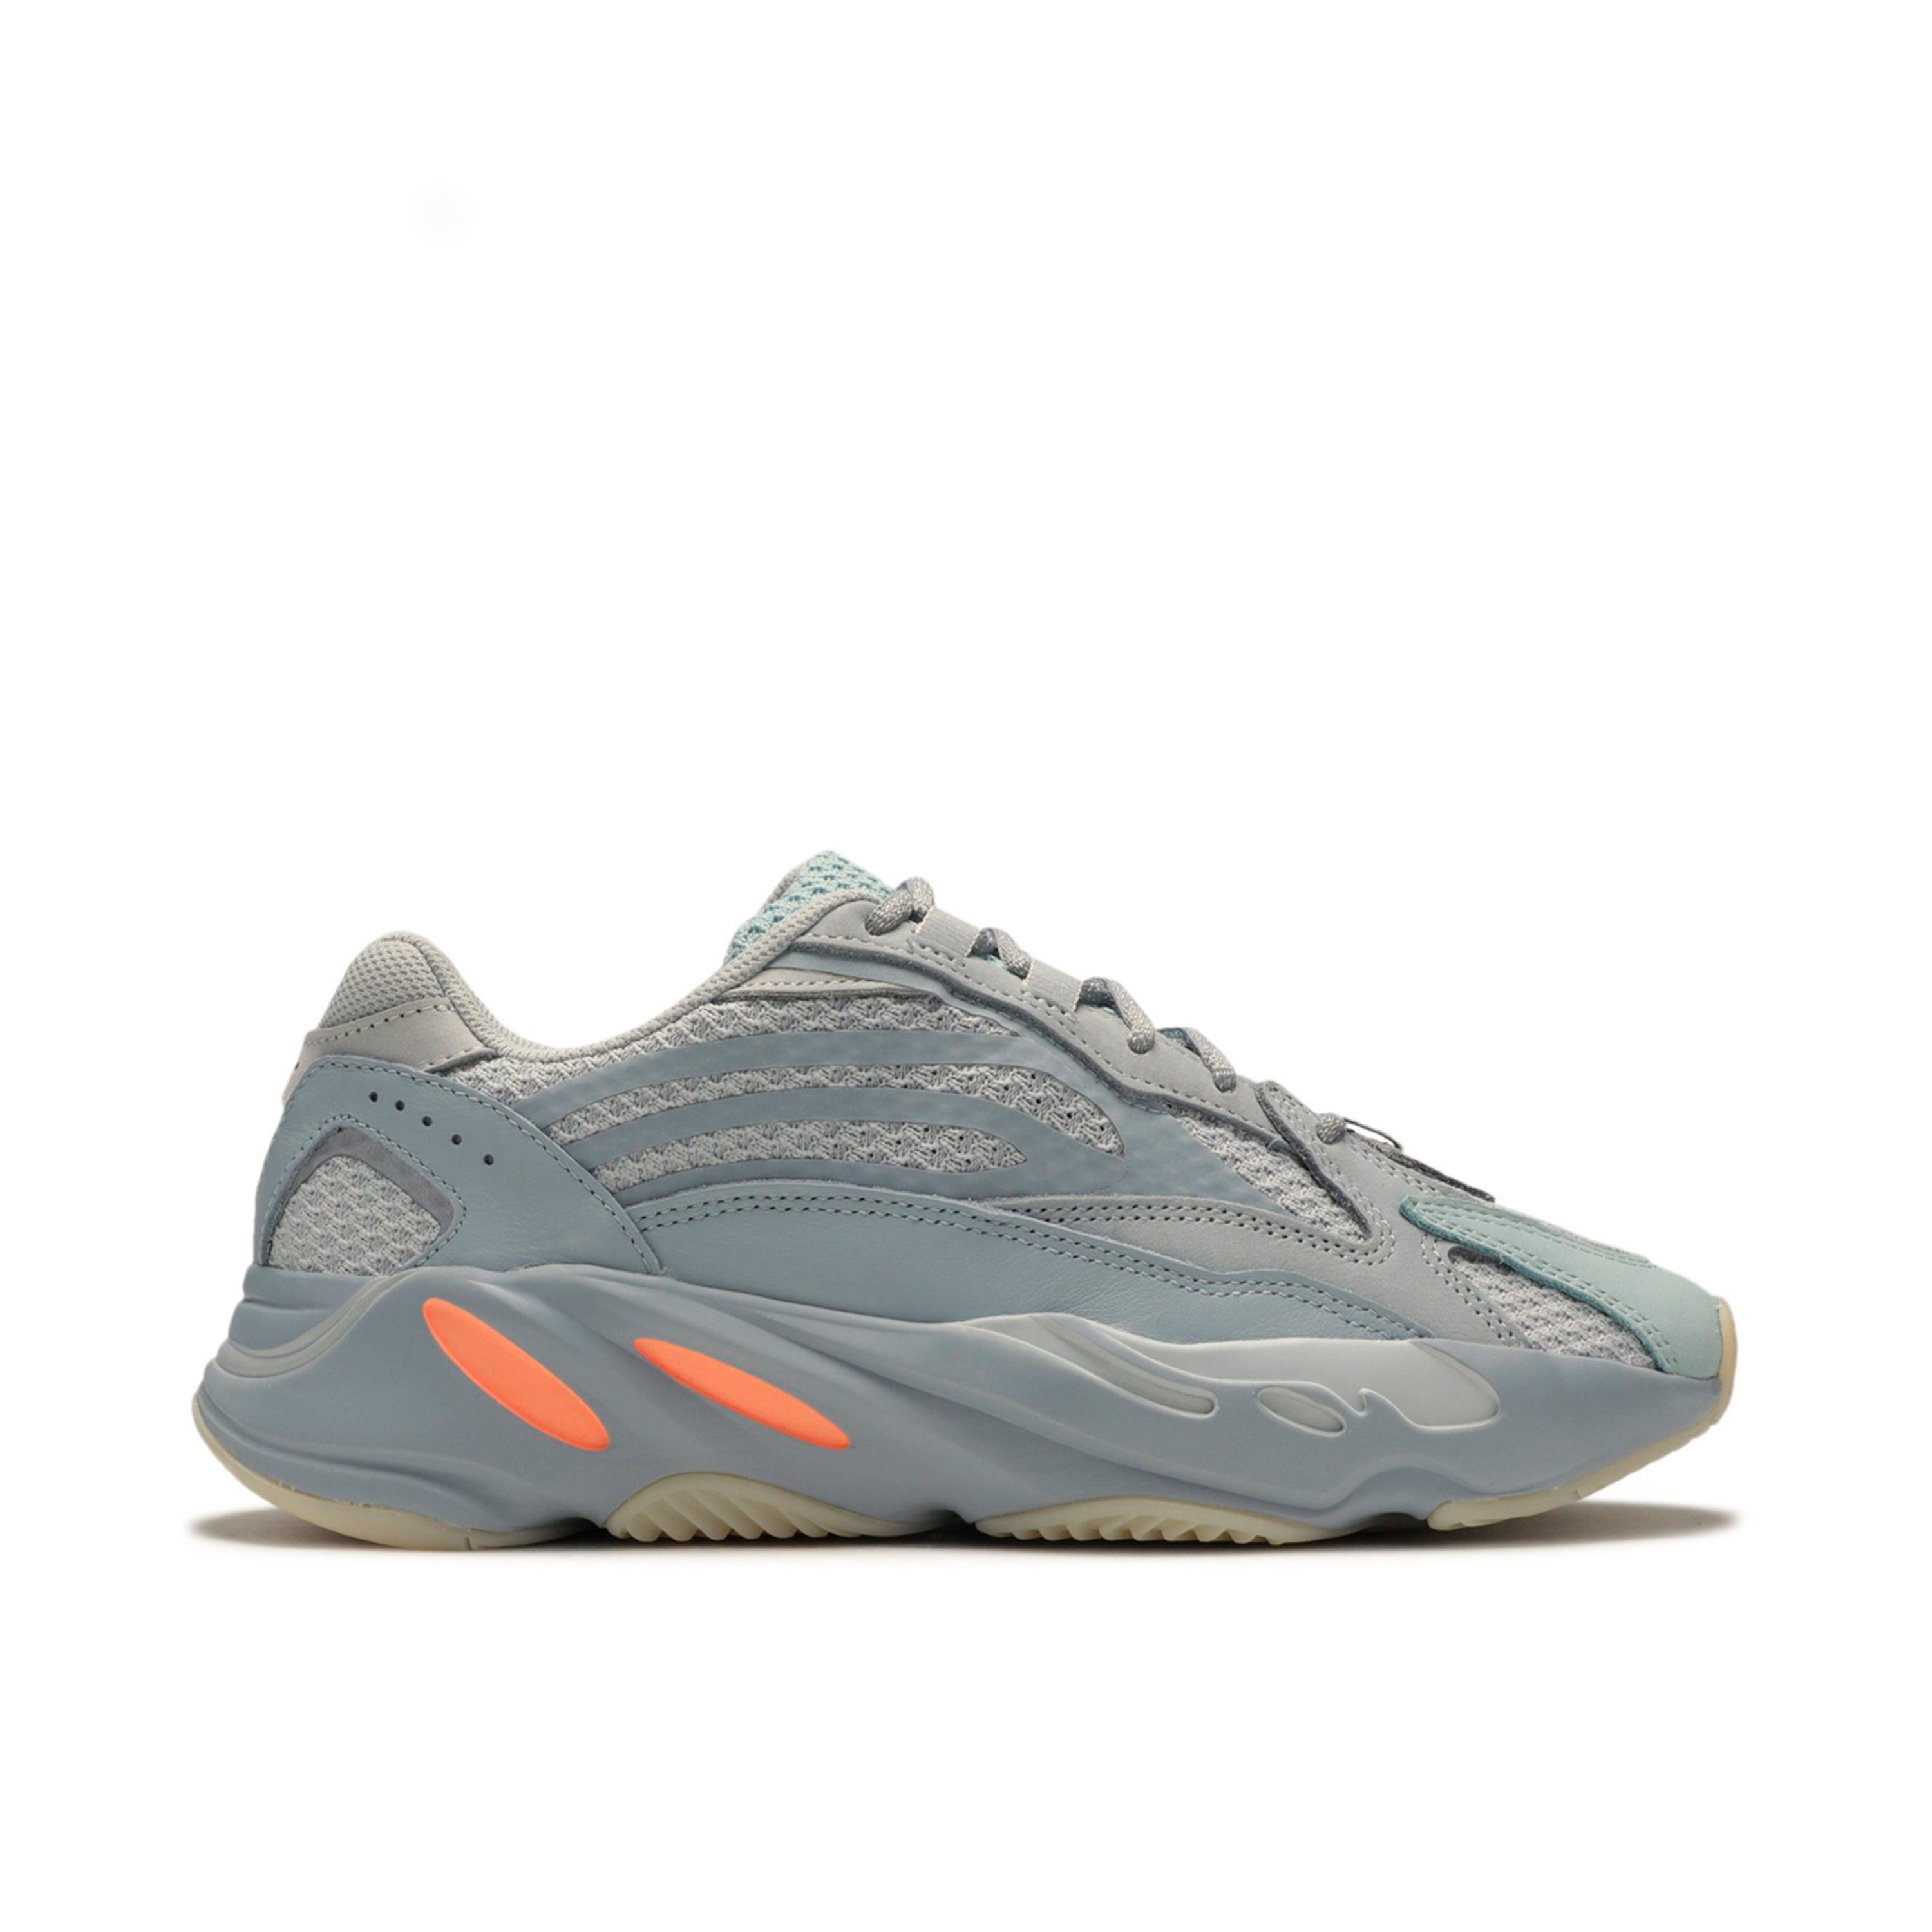 Yeezy Boost 700 Wave Runner | B75571 | Laced